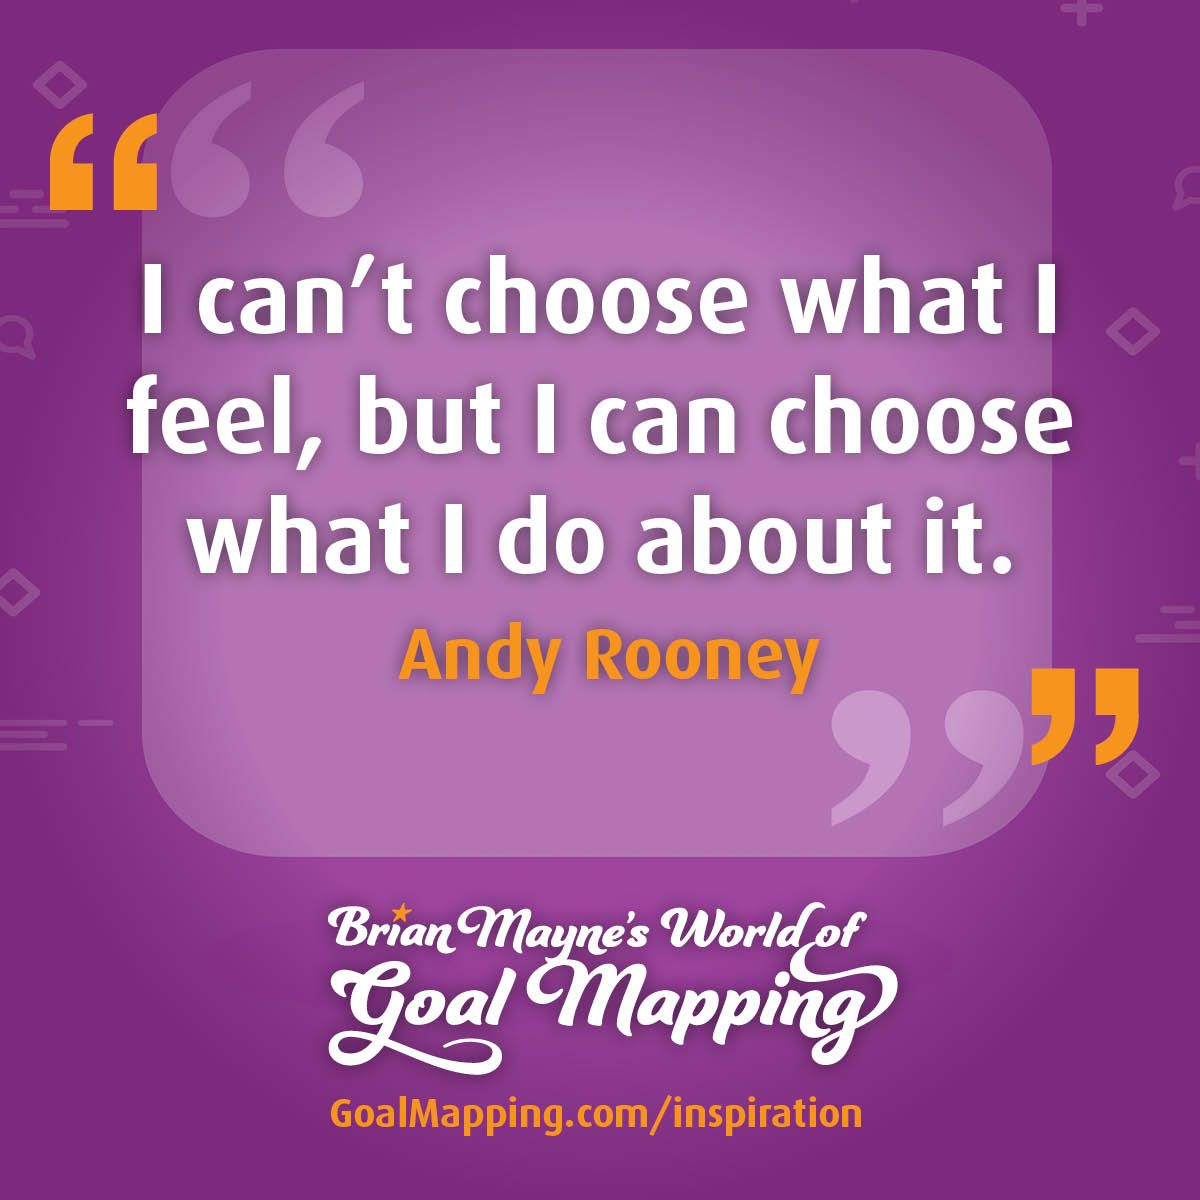 "I can’t choose what I feel, but I can choose what I do about it." Andy Rooney